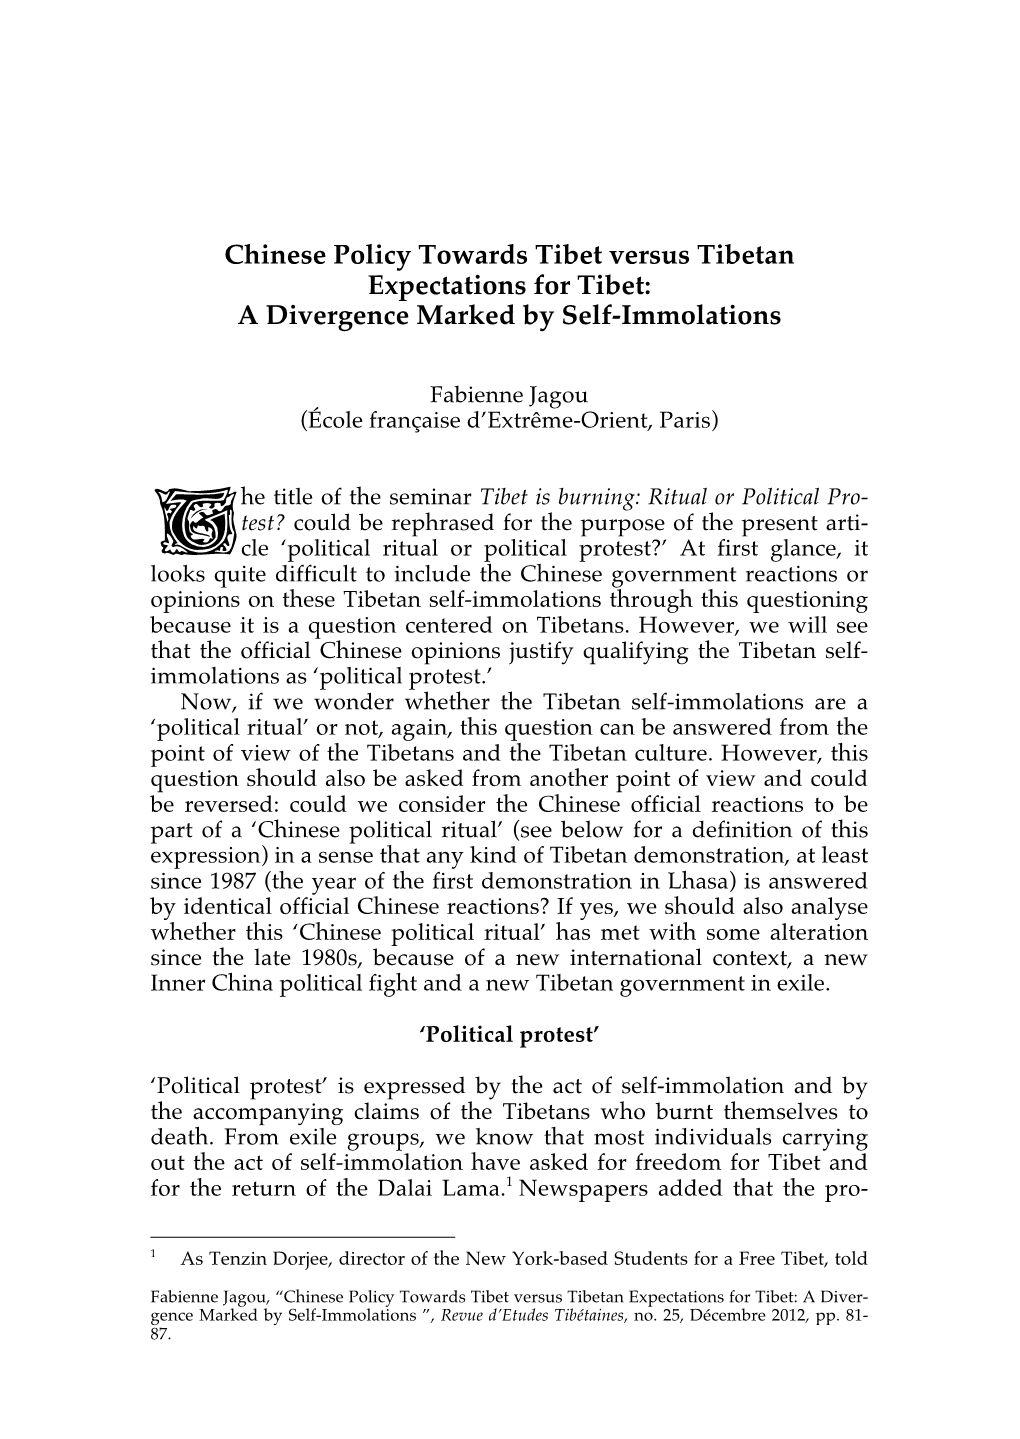 Chinese Policy Towards Tibet Versus Tibetan Expectations for Tibet: a Divergence Marked by Self-Immolations